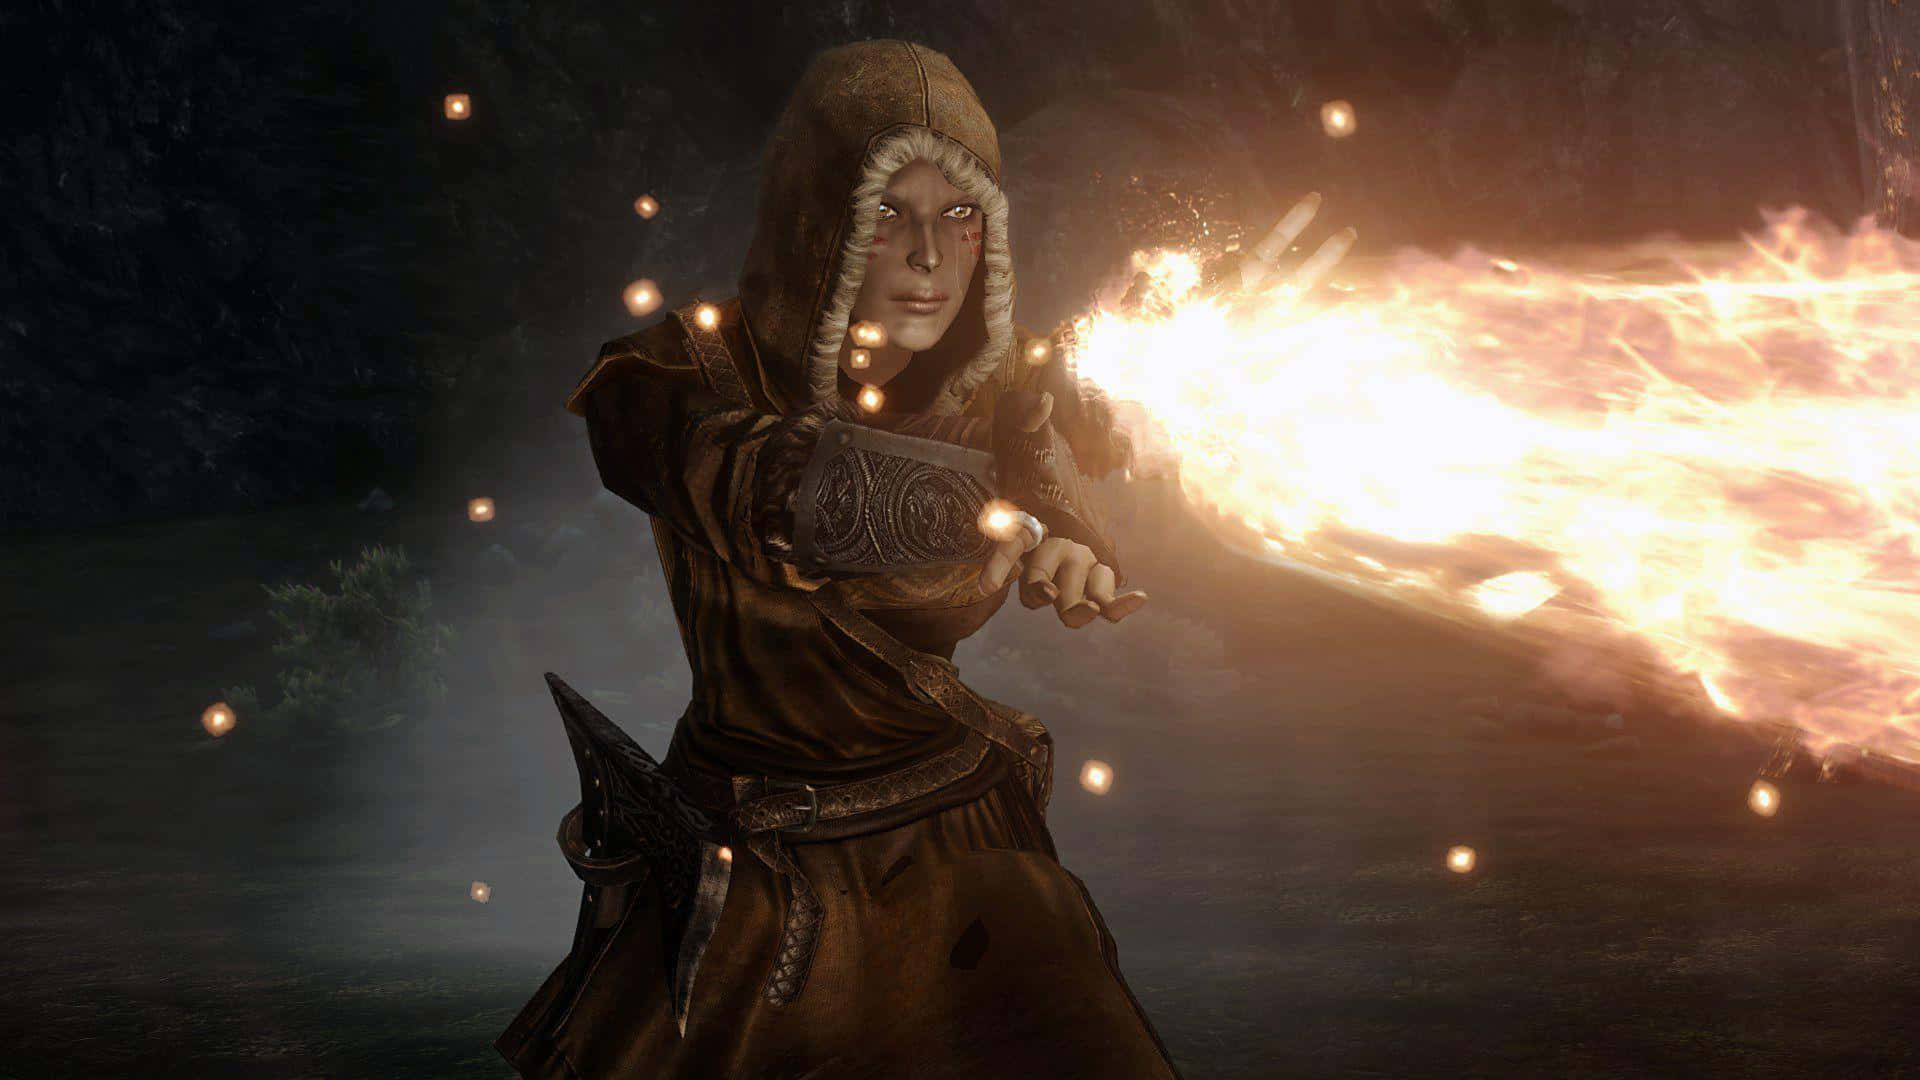 Powerful Skyrim Mage casting a spell in battle Wallpaper